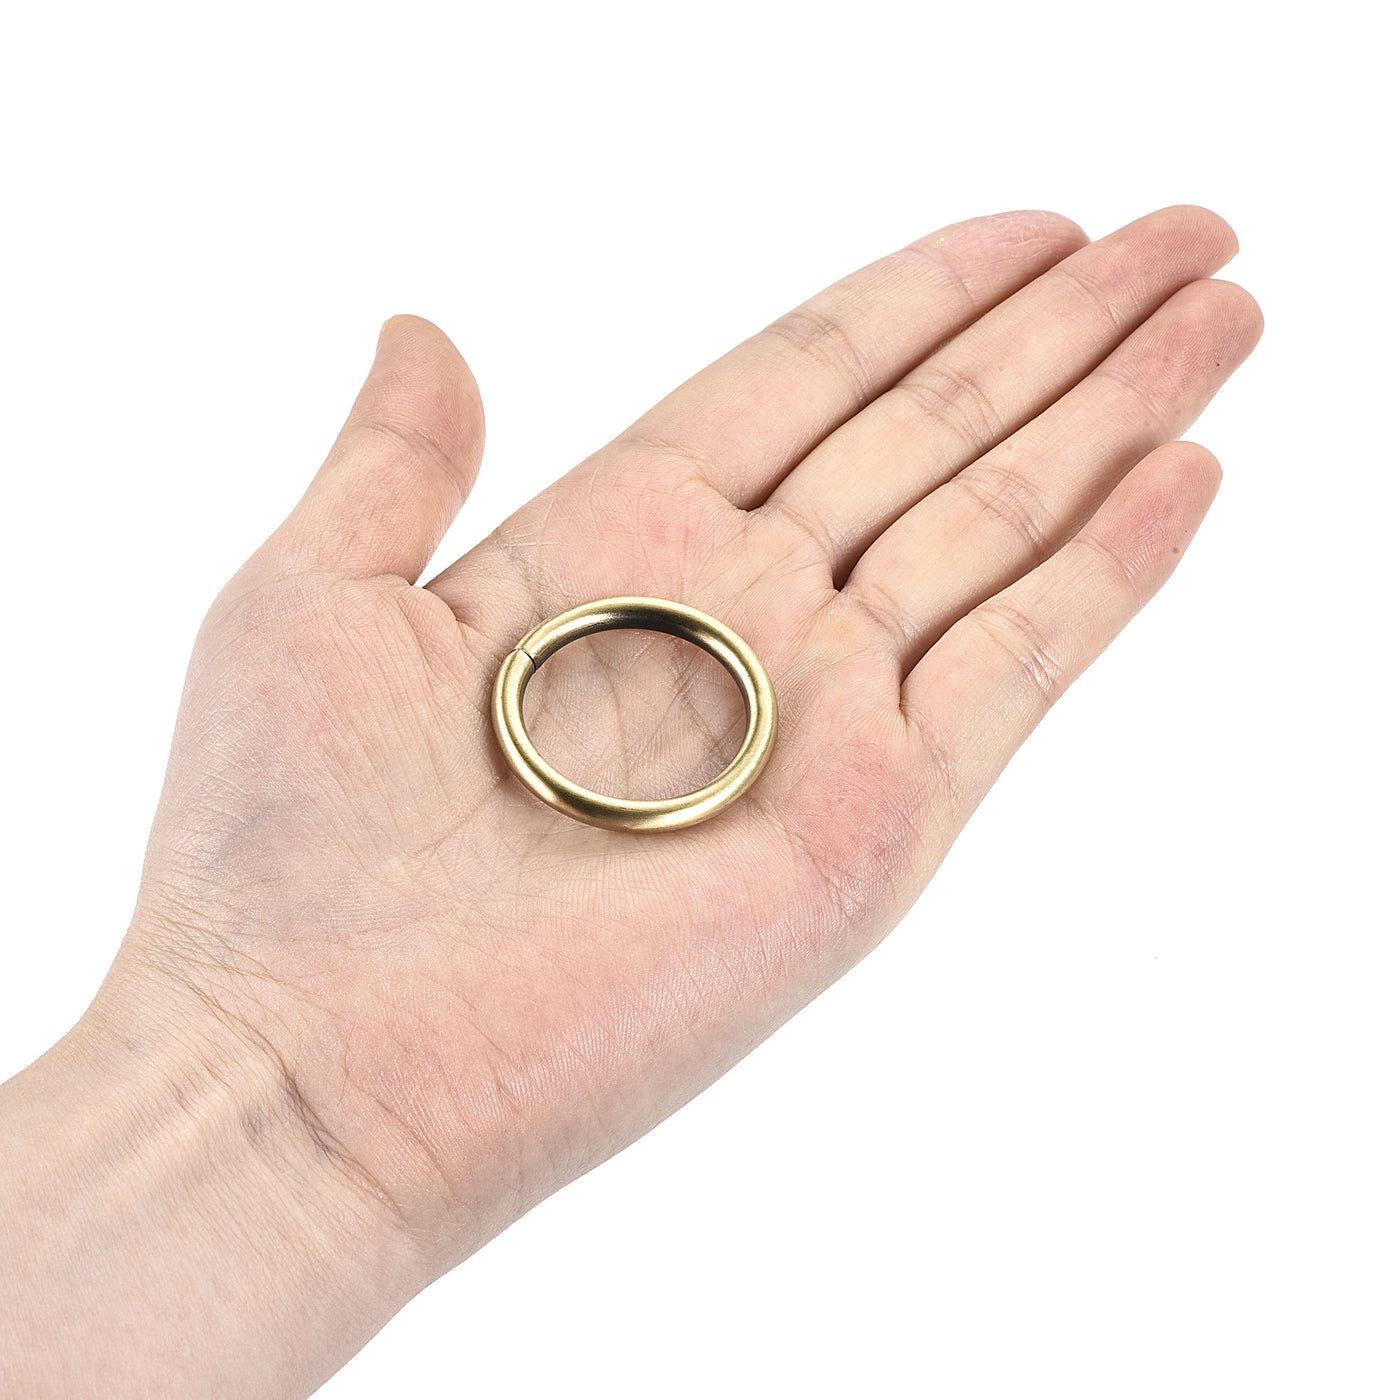 uxcell Uxcell Metal O Ring 25mm ID 3.8mm Thickness Non-Welded Rings Bronze Tone 10pcs